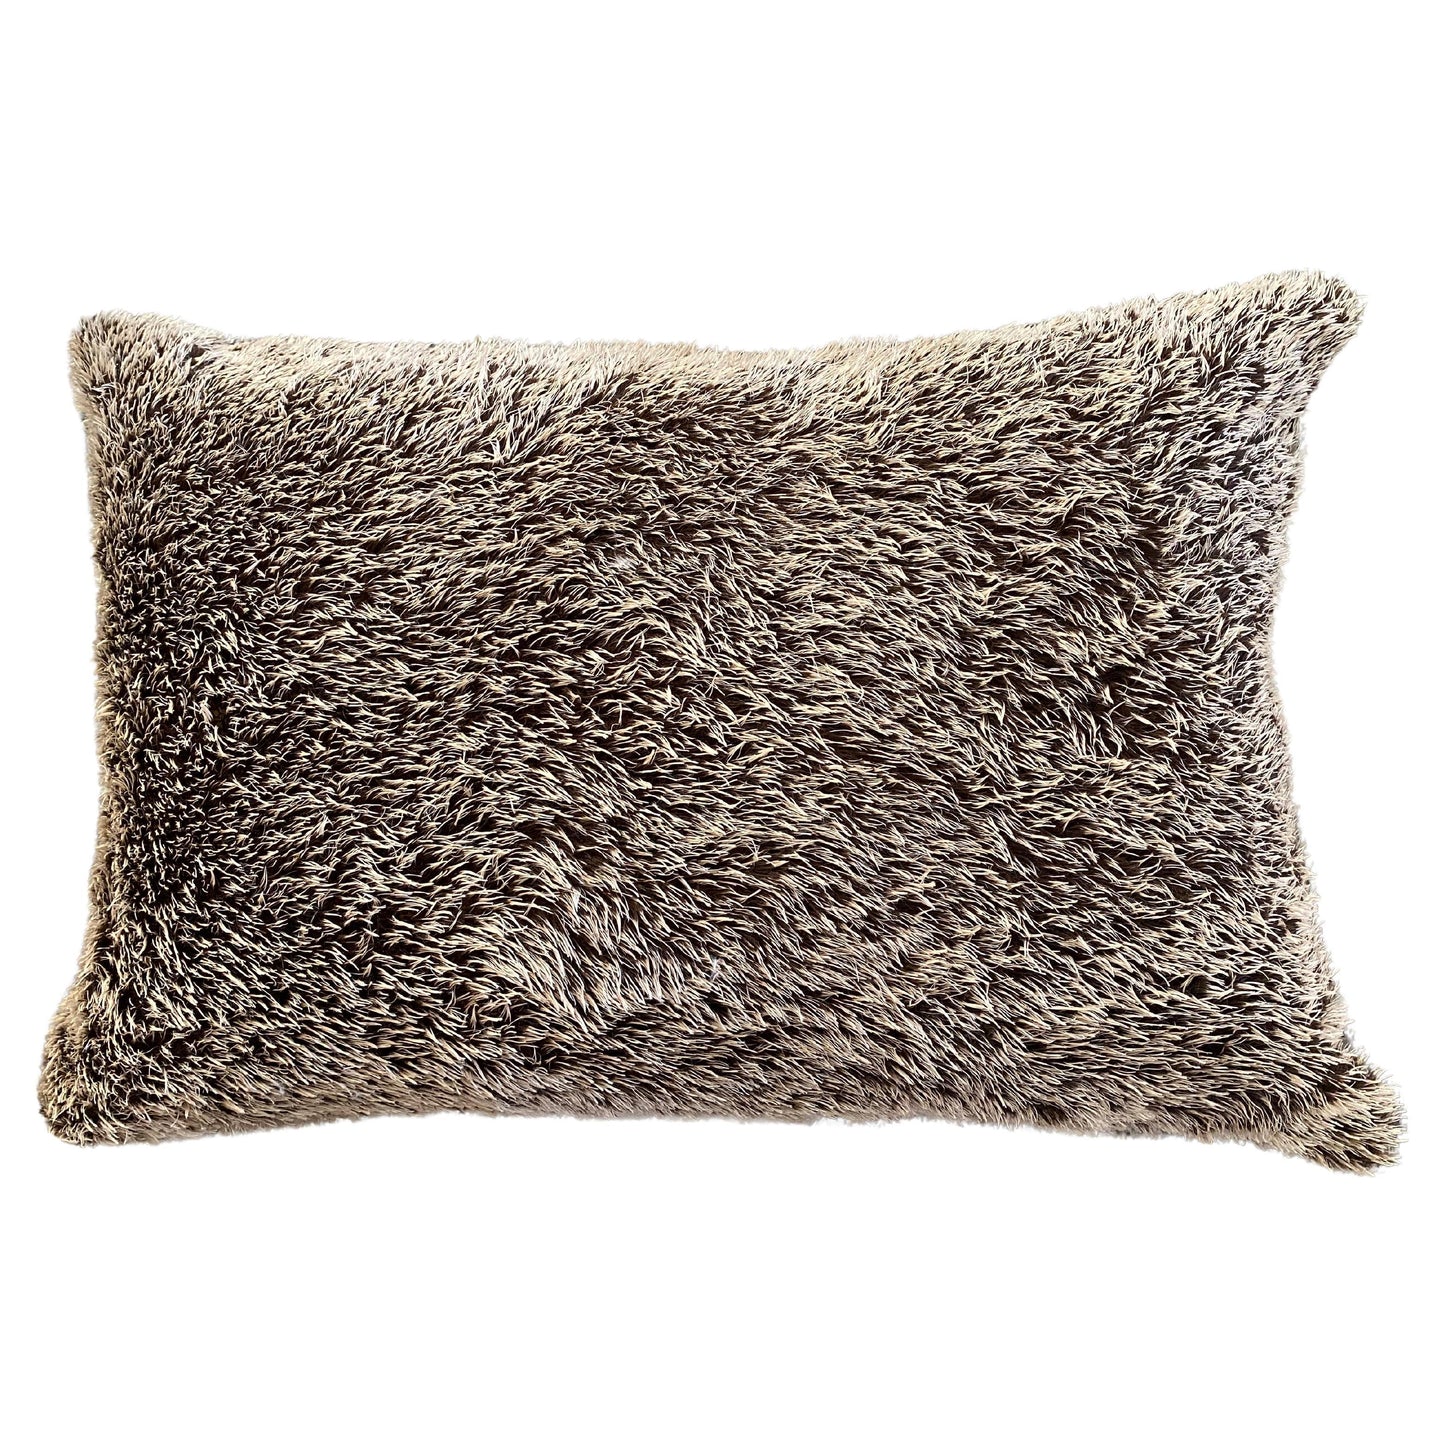 Mountain Inspired Lumbar Pillow with Turquoise Accent and Porcupine Back